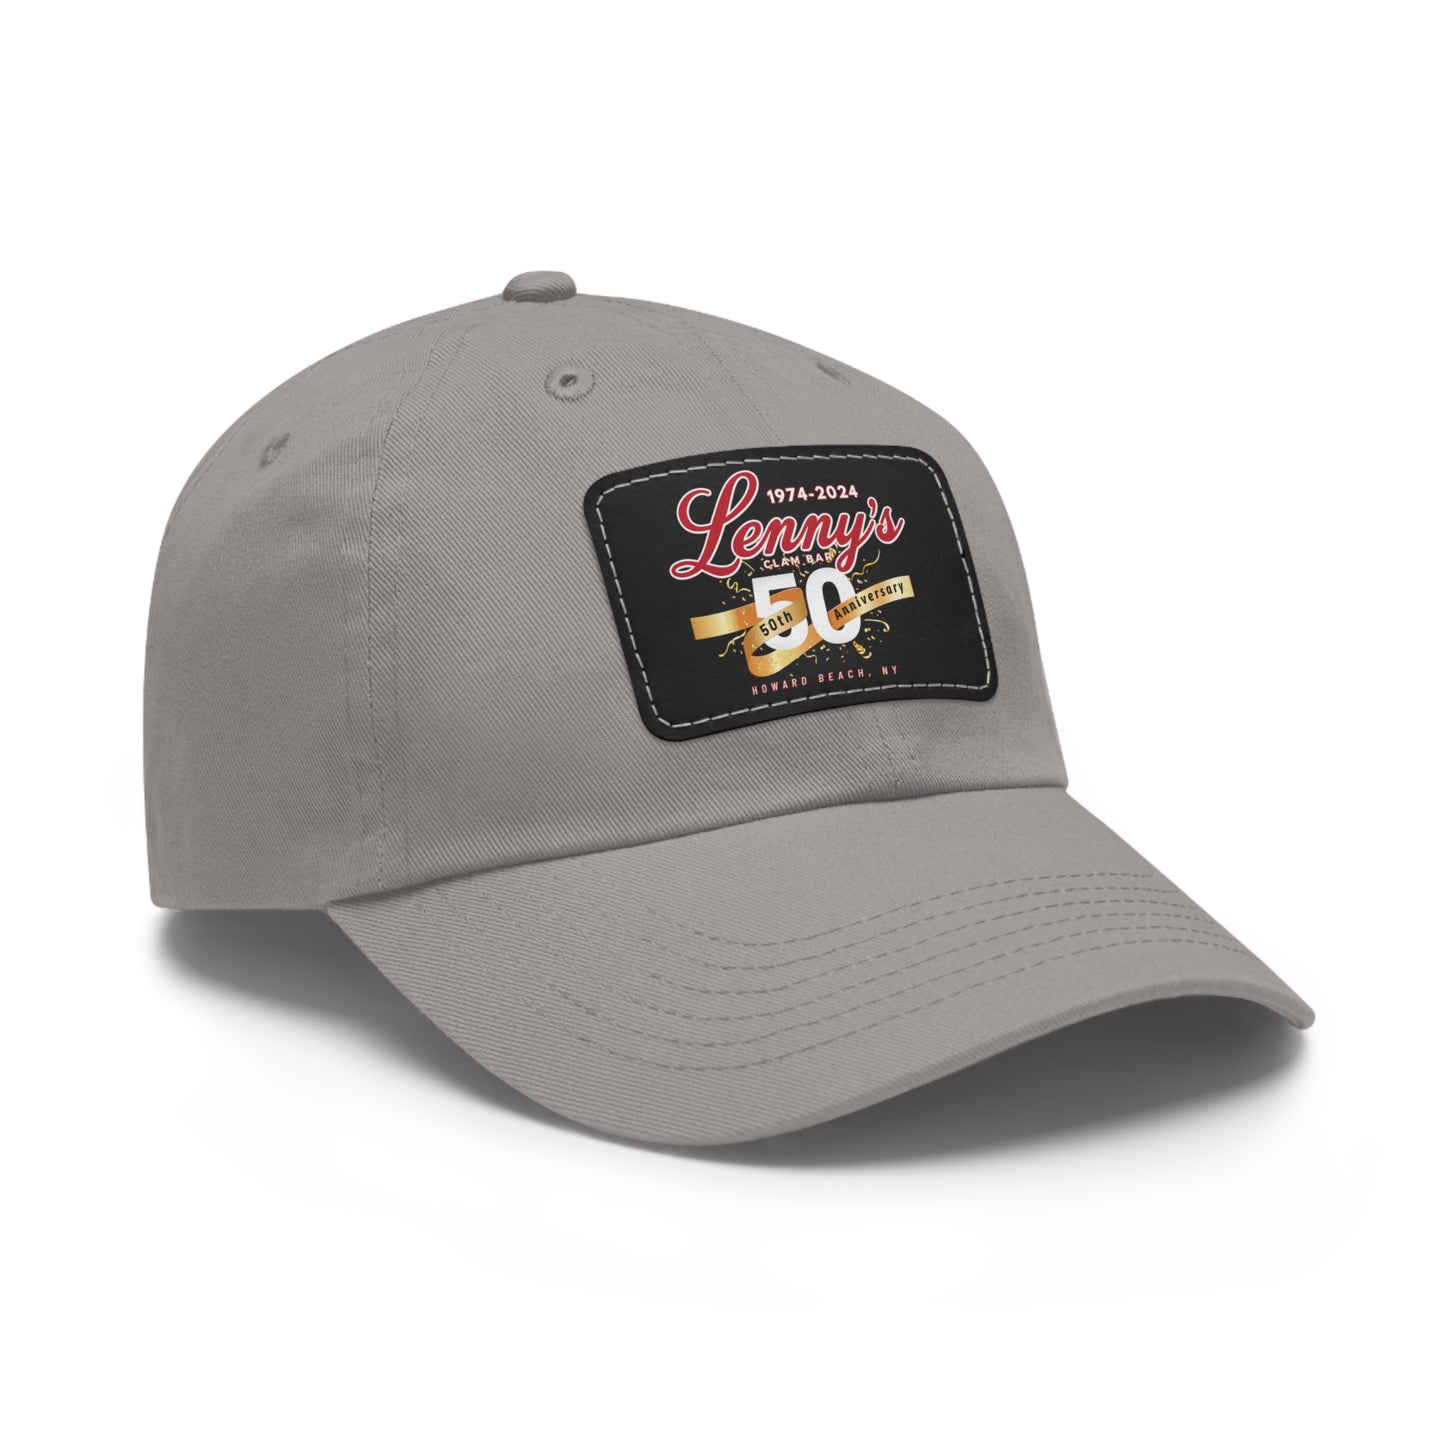 Lenny's 50th Anniversary Dad Hat with Leather Patch